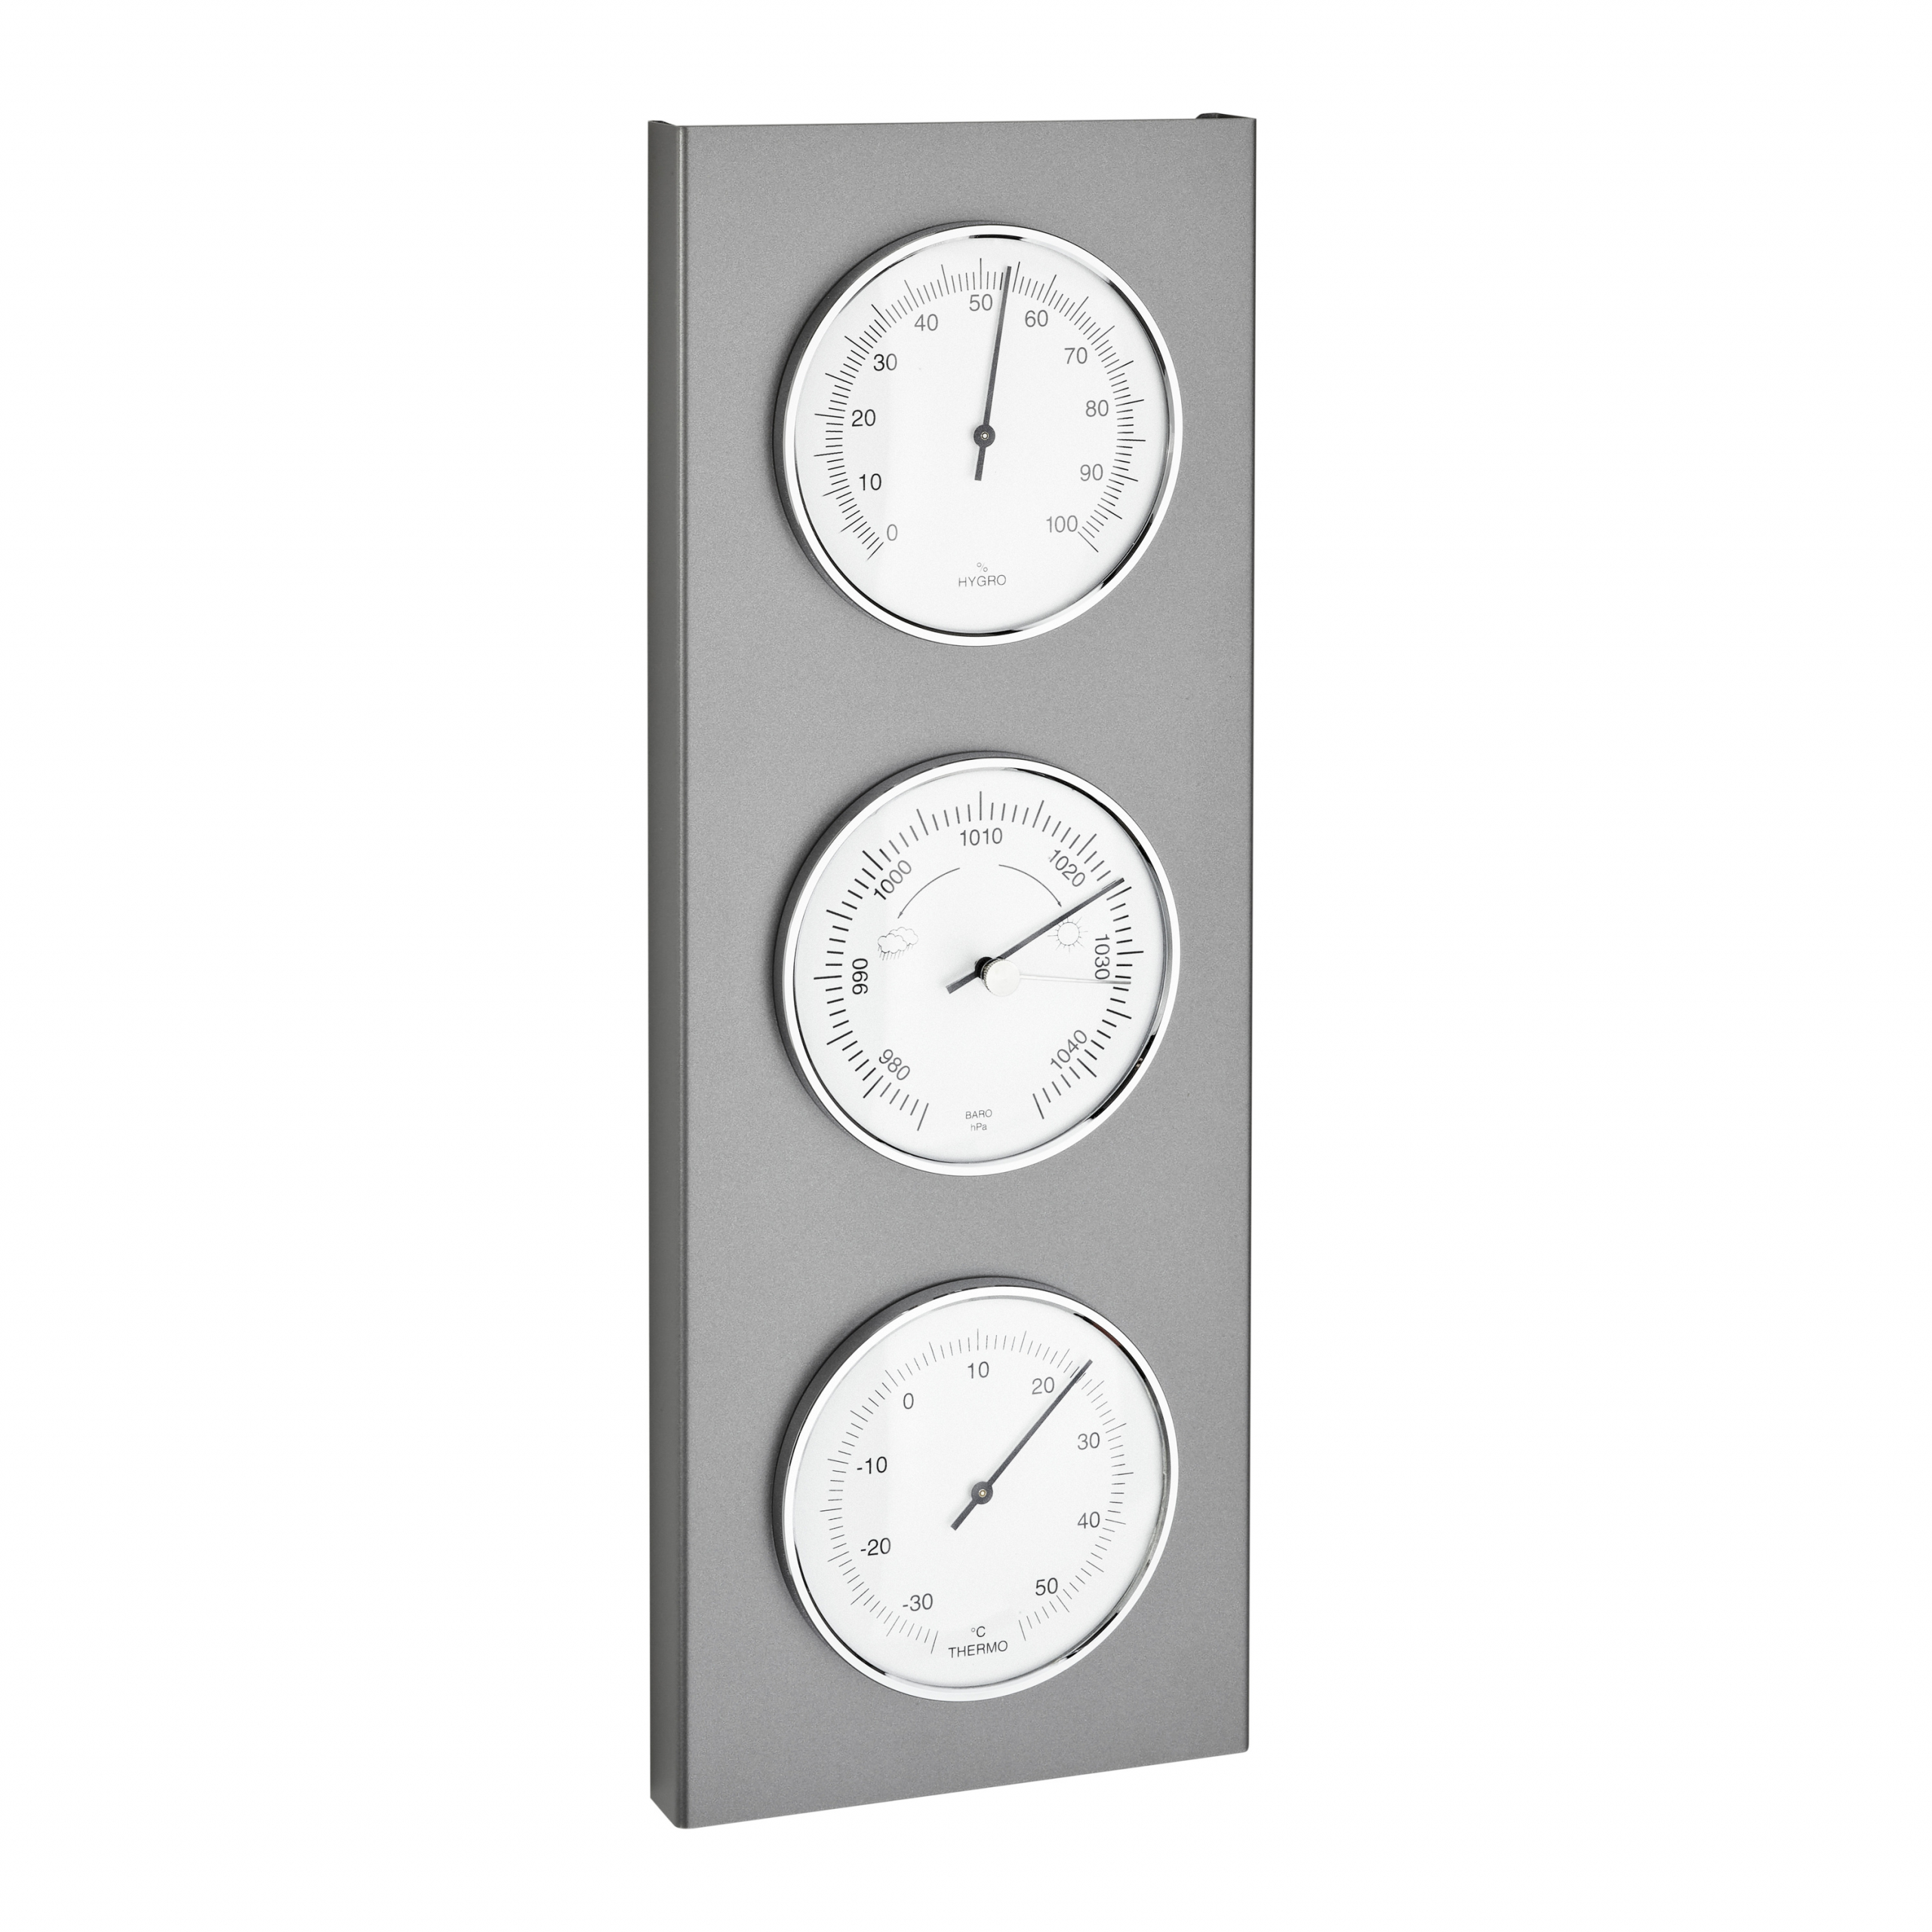 Analogue outdoor weather station made of stainless steel